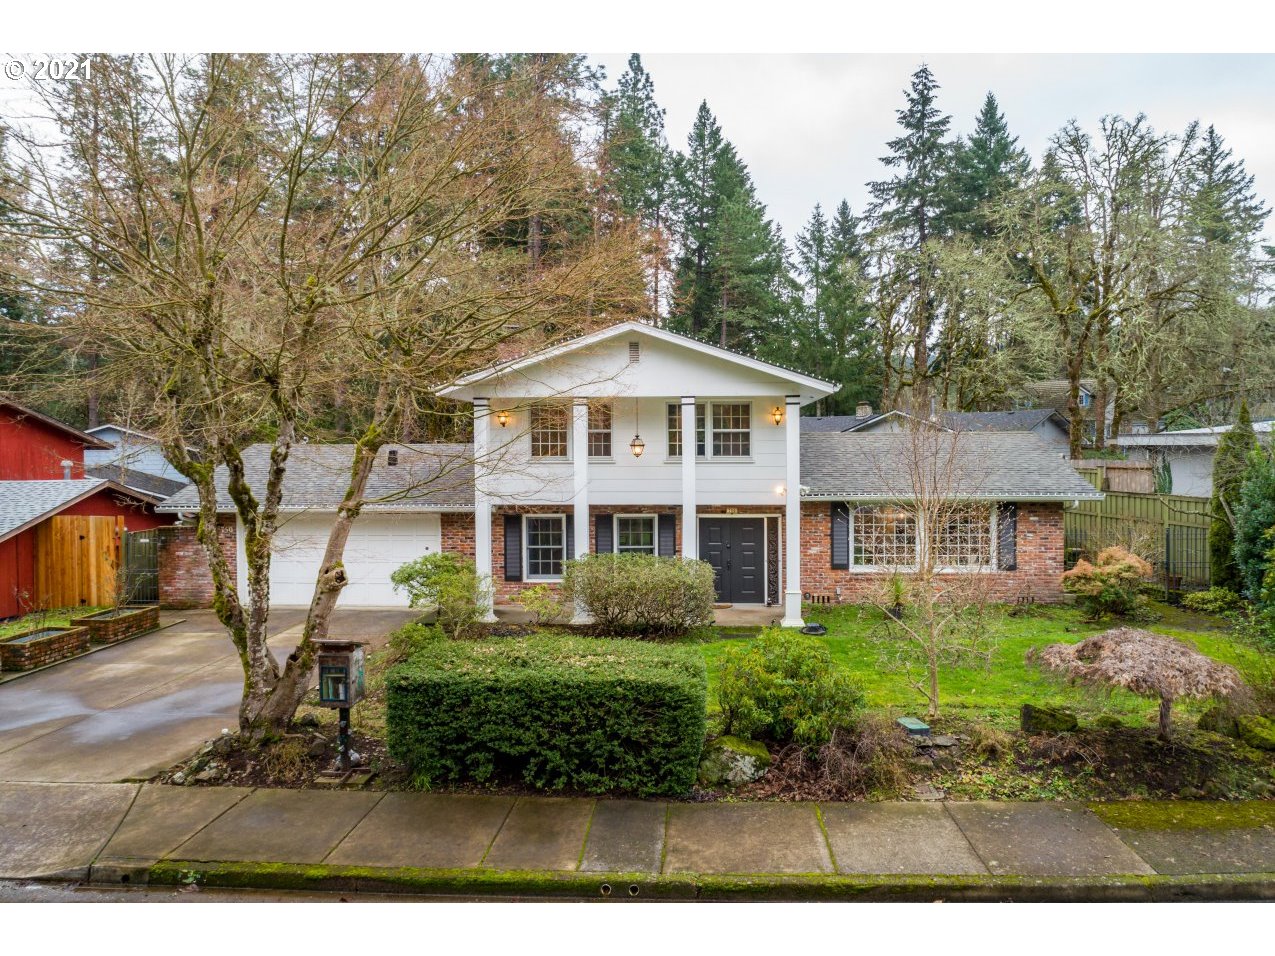 750 FOOTHILL DR (1 of 16)